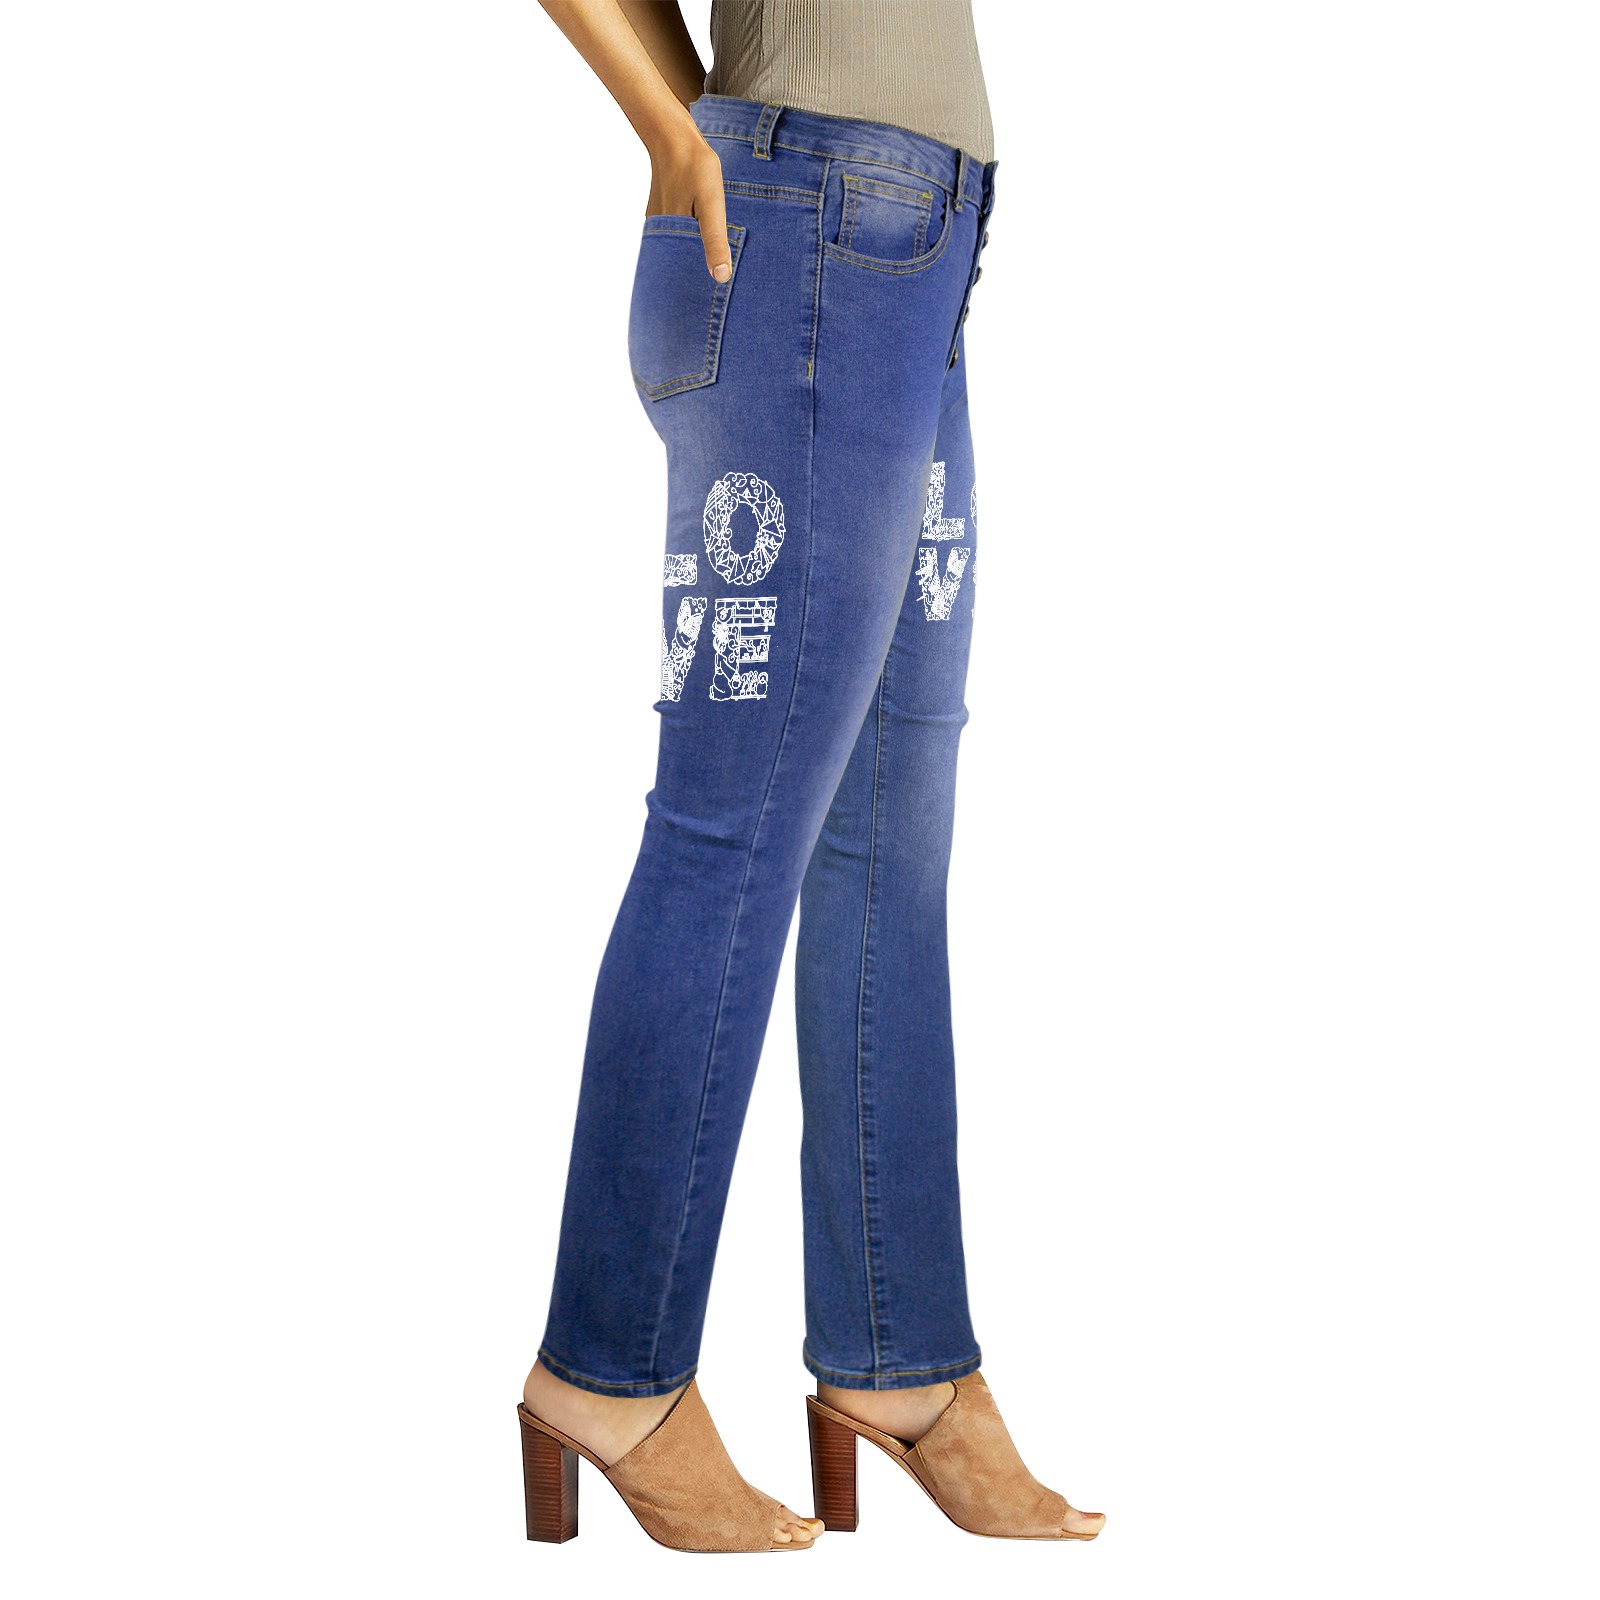 White word LOVE in Japanese-styled decorative font Women's Jeans (Front&Back Printing)